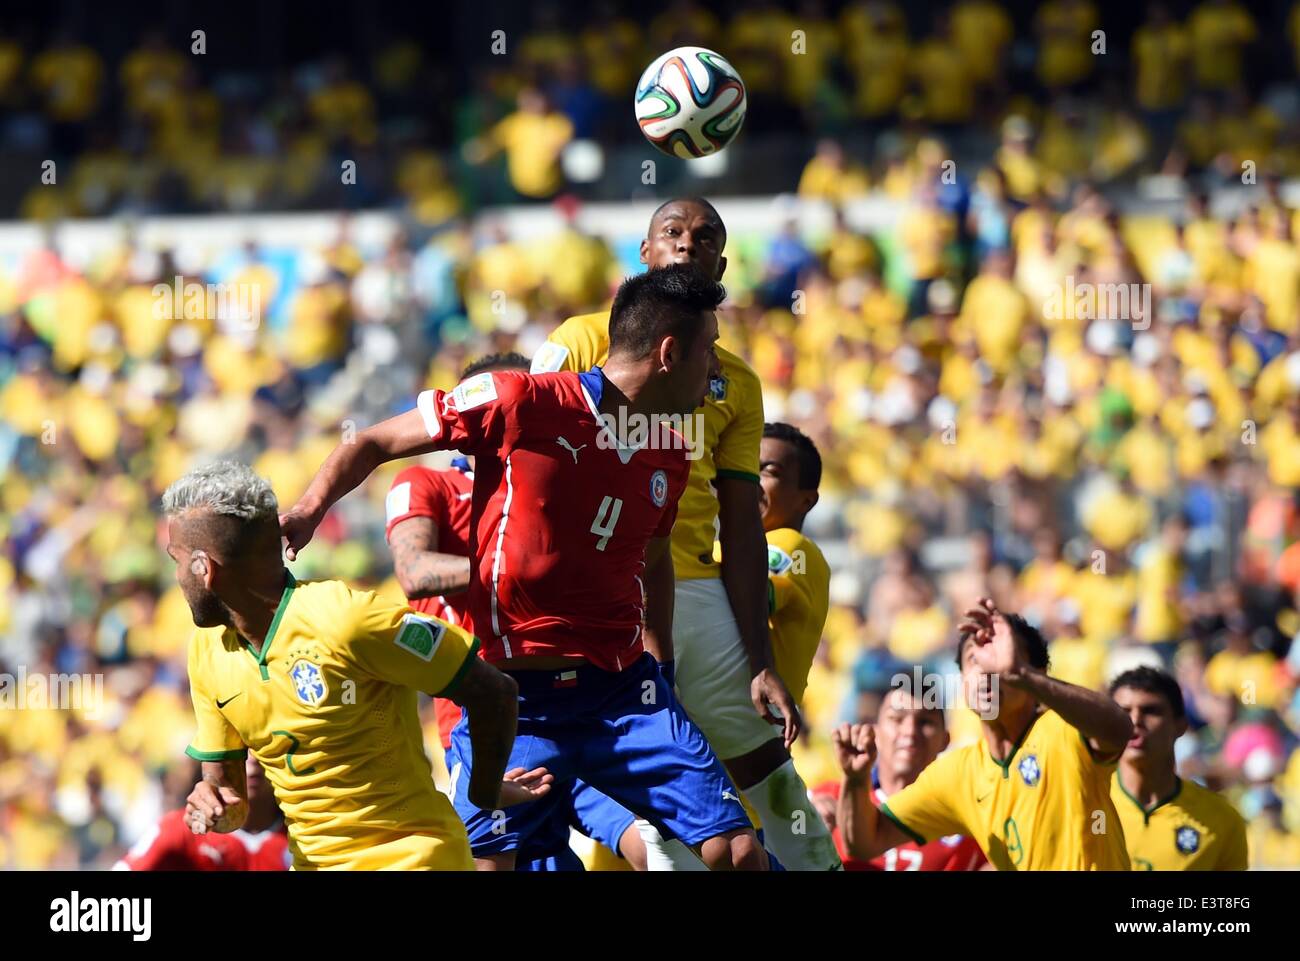 Belo Horizonte, Brazil. 28th June, 2014. Brazil's Fernandinho competes for a header with Chile's Mauricio Isla during a Round of 16 match between Brazil and Chile of 2014 FIFA World Cup at the Estadio Mineirao Stadium in Belo Horizonte, Brazil, on June 28, 2014. Credit:  Liu Dawei/Xinhua/Alamy Live News Stock Photo